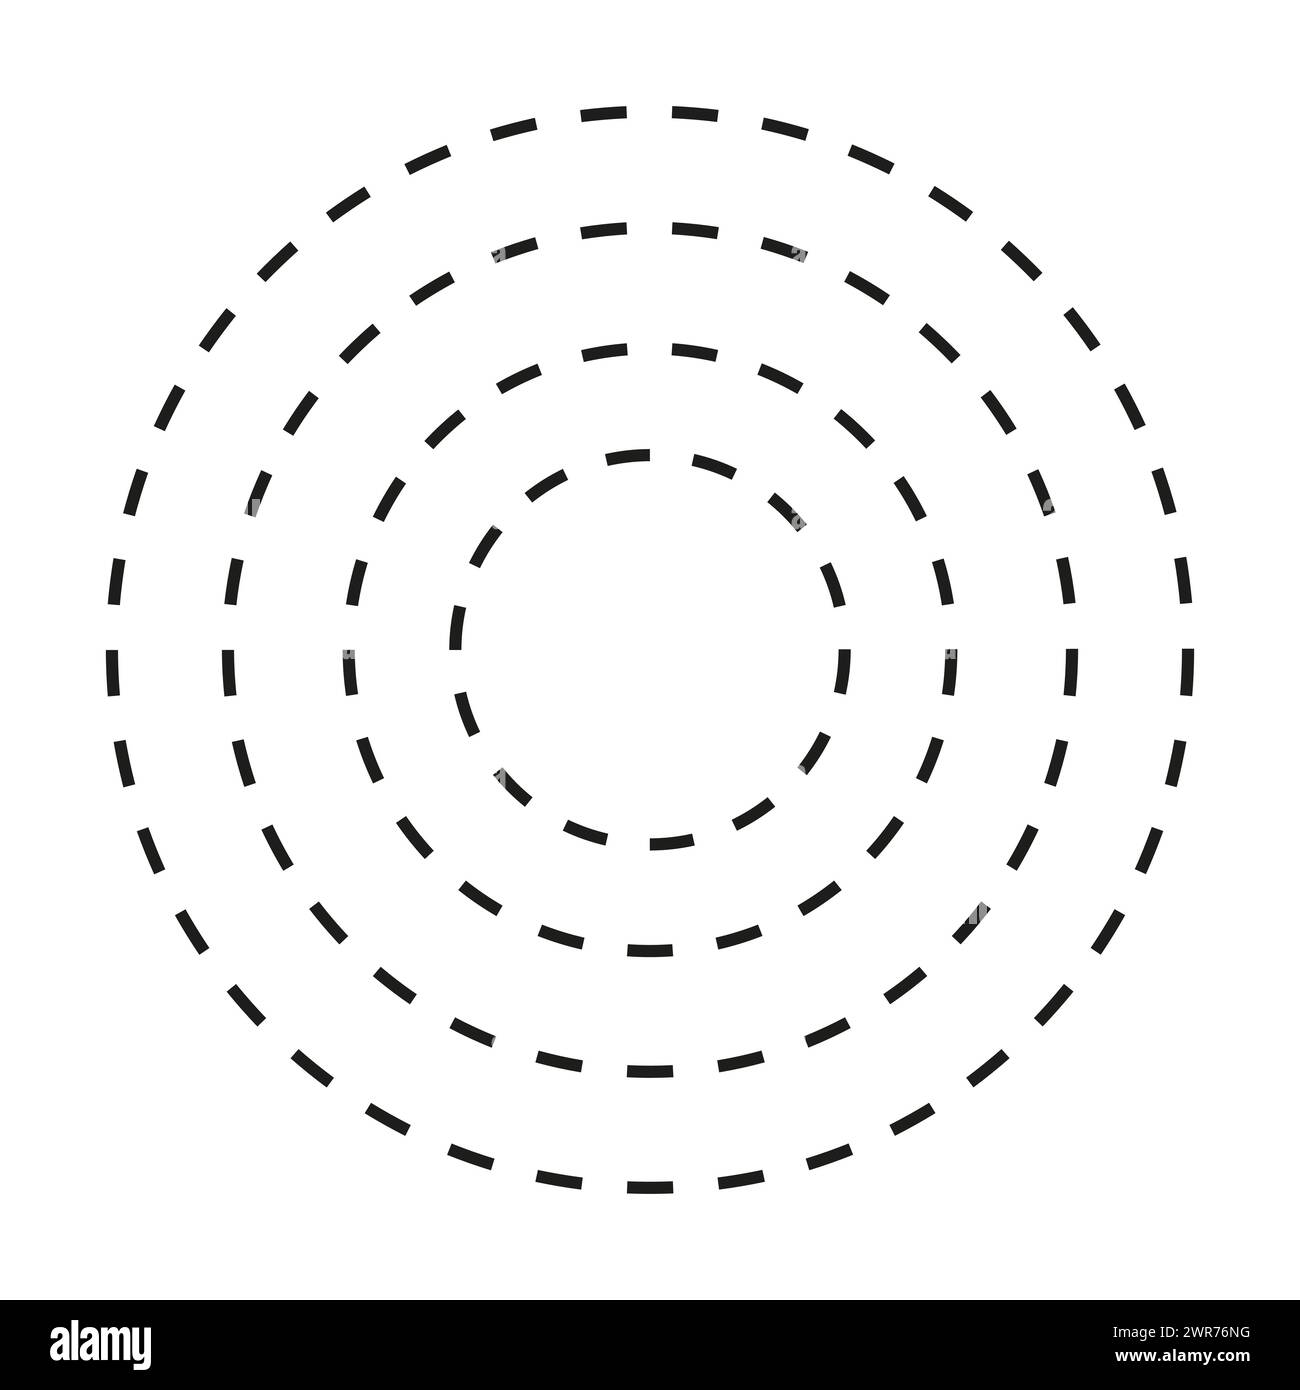 Black Dashed Concentric Circles. Vector illustration. EPS 10. Stock Vector